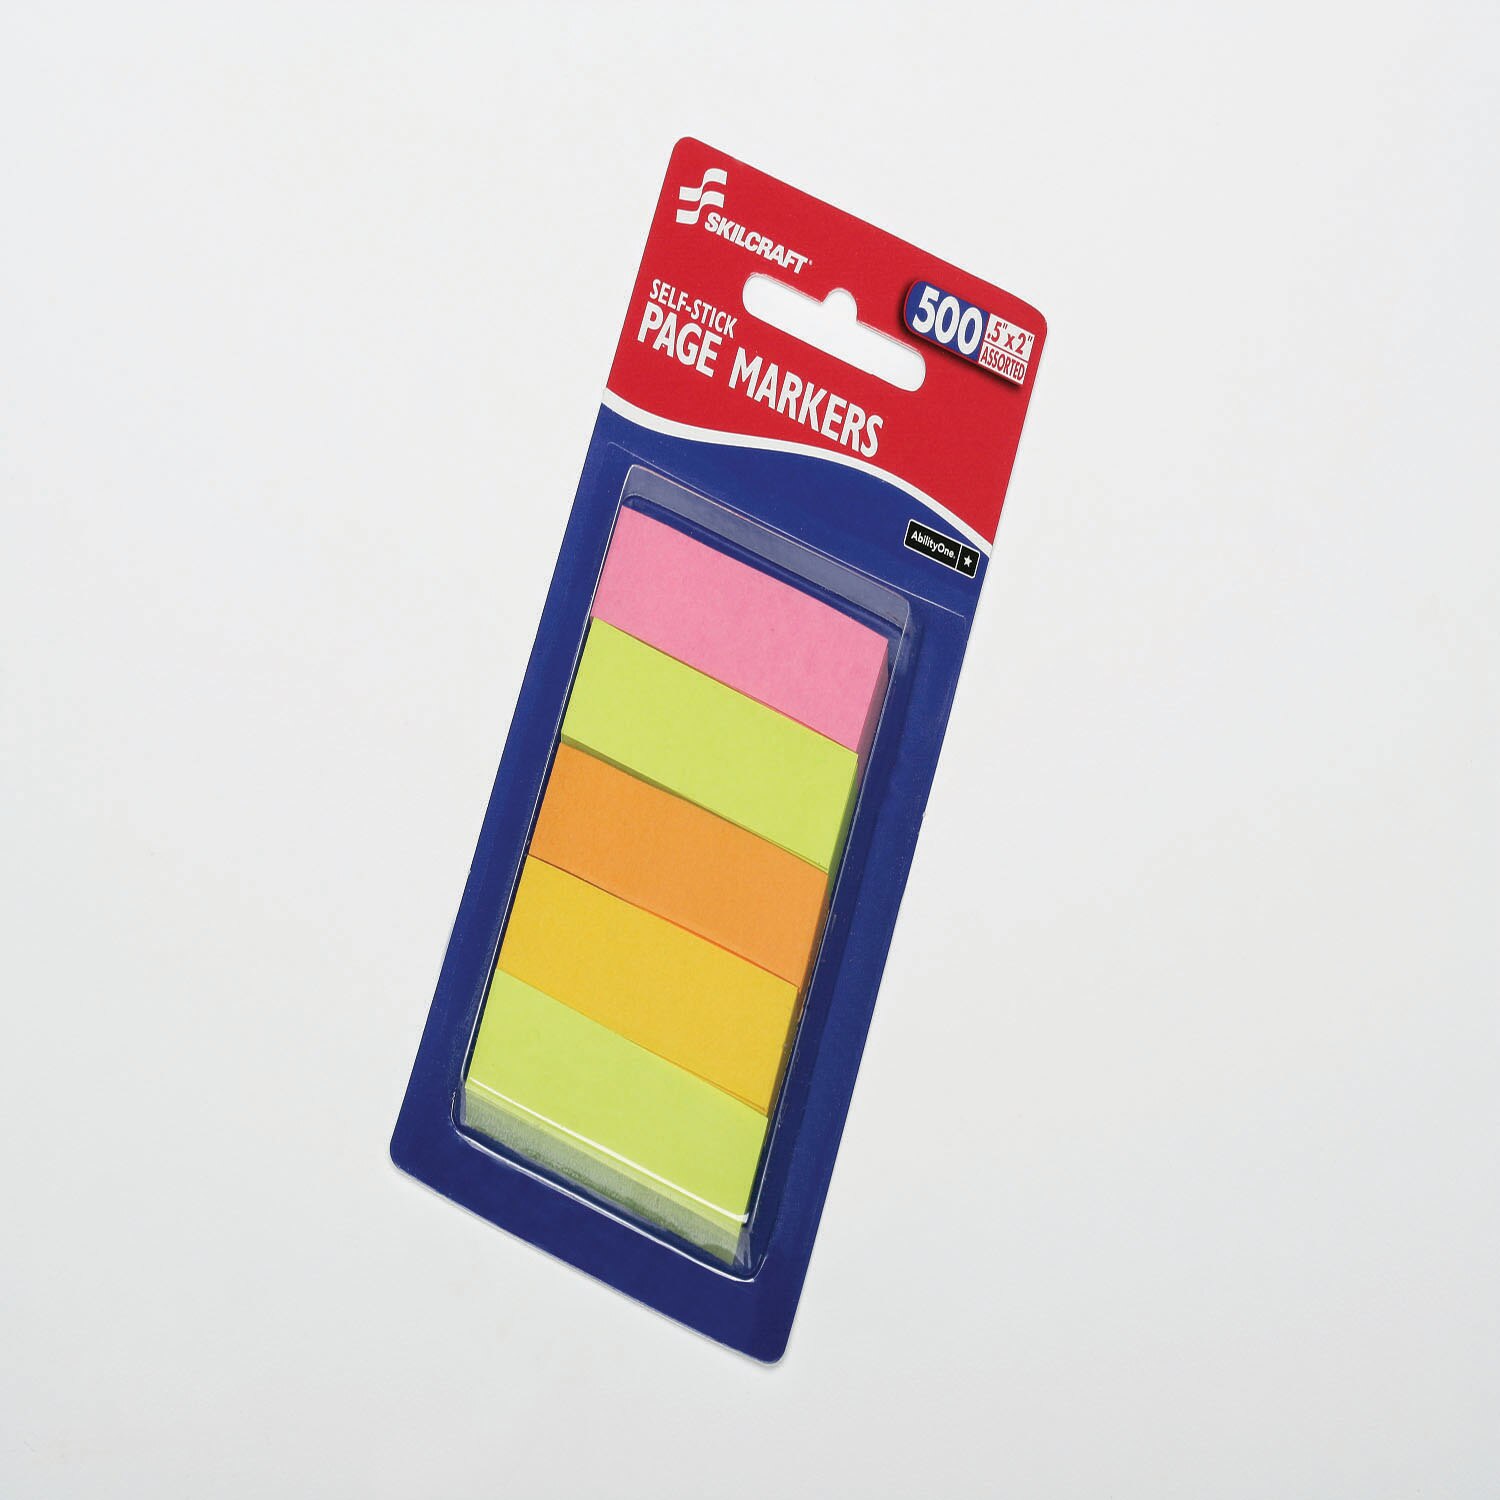 Tabs, Self-Stick, Page Makers Repositionable, .5" x 2", Assorted Colors